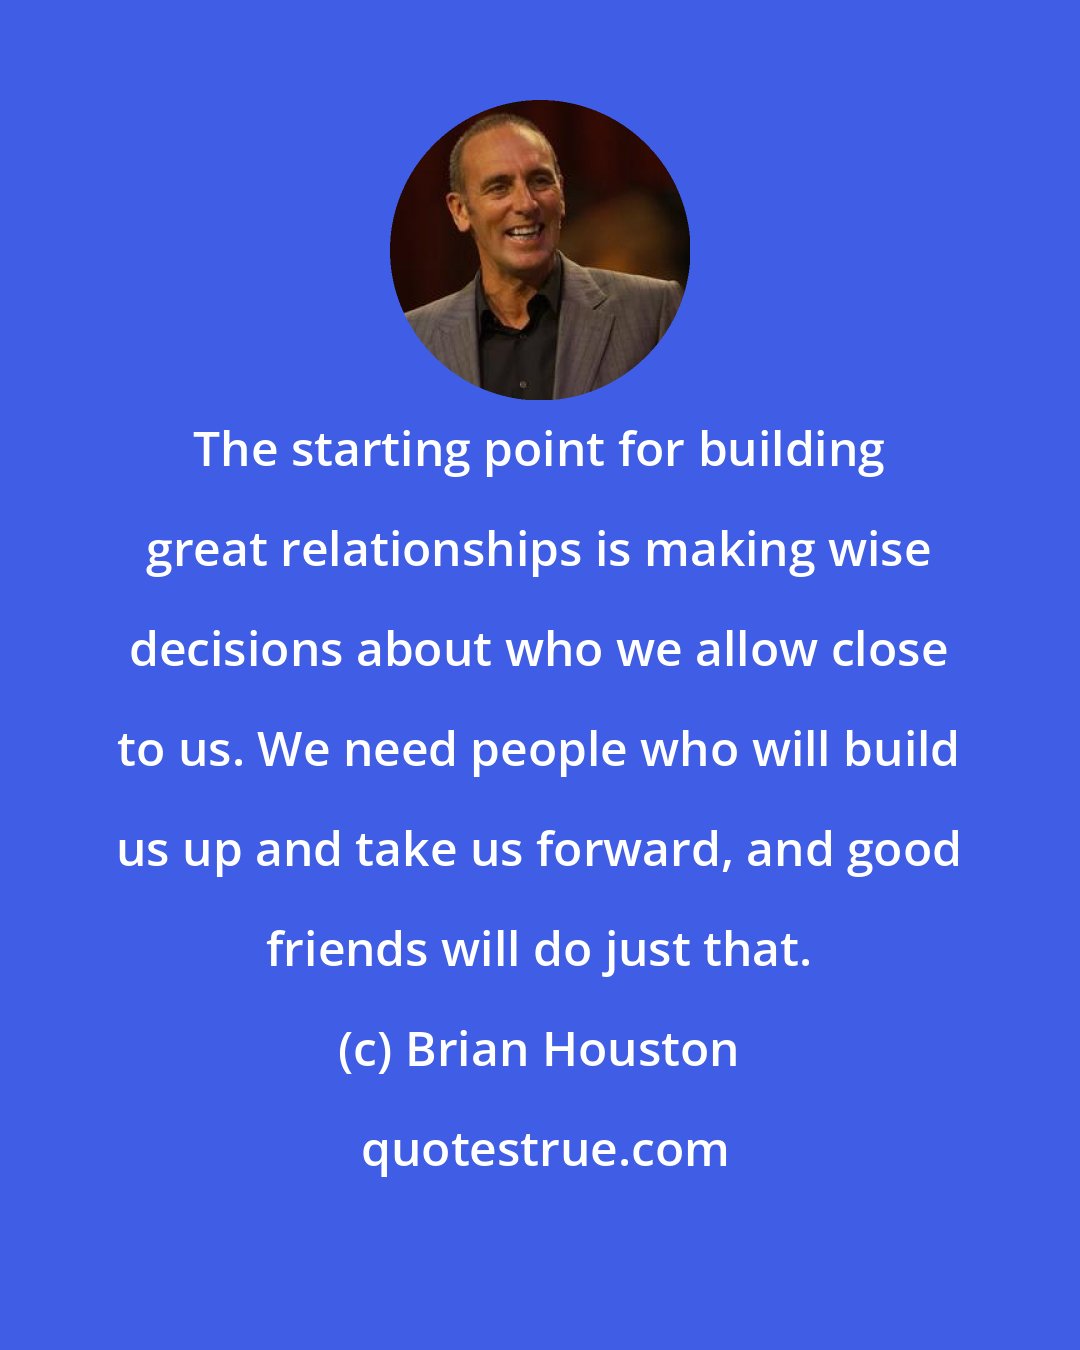 Brian Houston: The starting point for building great relationships is making wise decisions about who we allow close to us. We need people who will build us up and take us forward, and good friends will do just that.